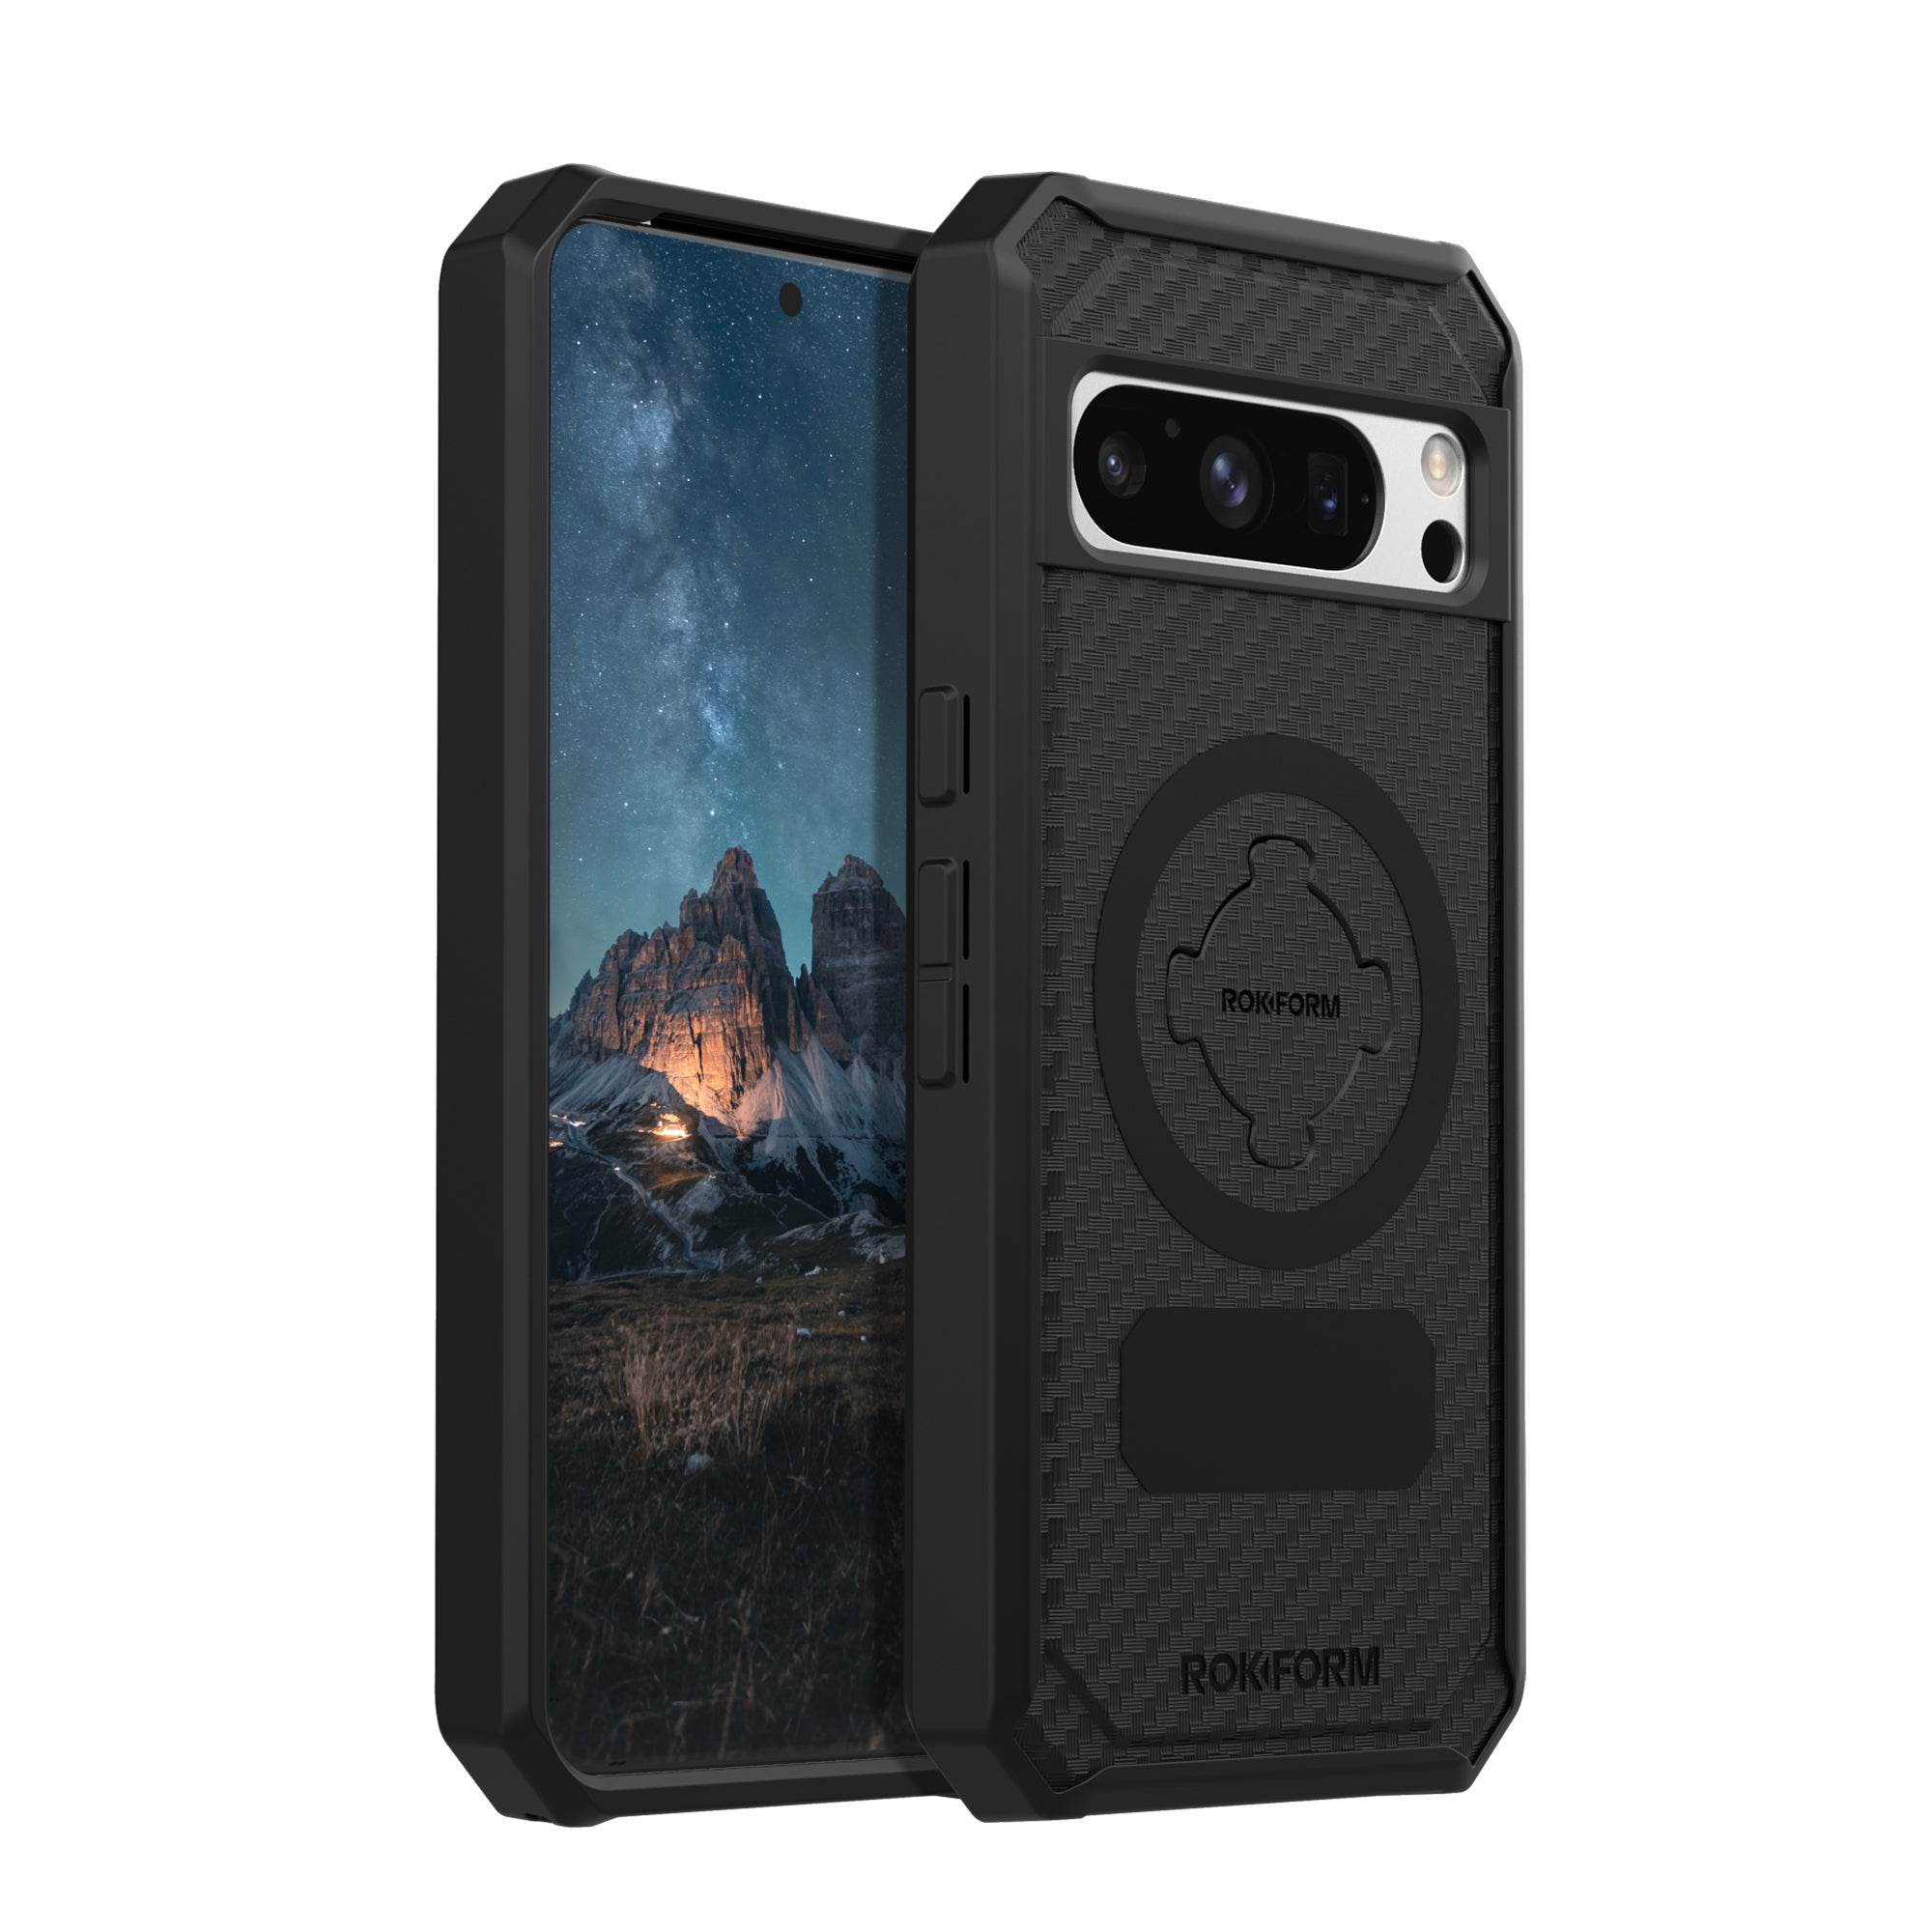 Google Pixel 8 Pro Case: Protect your phone with style - Google Store